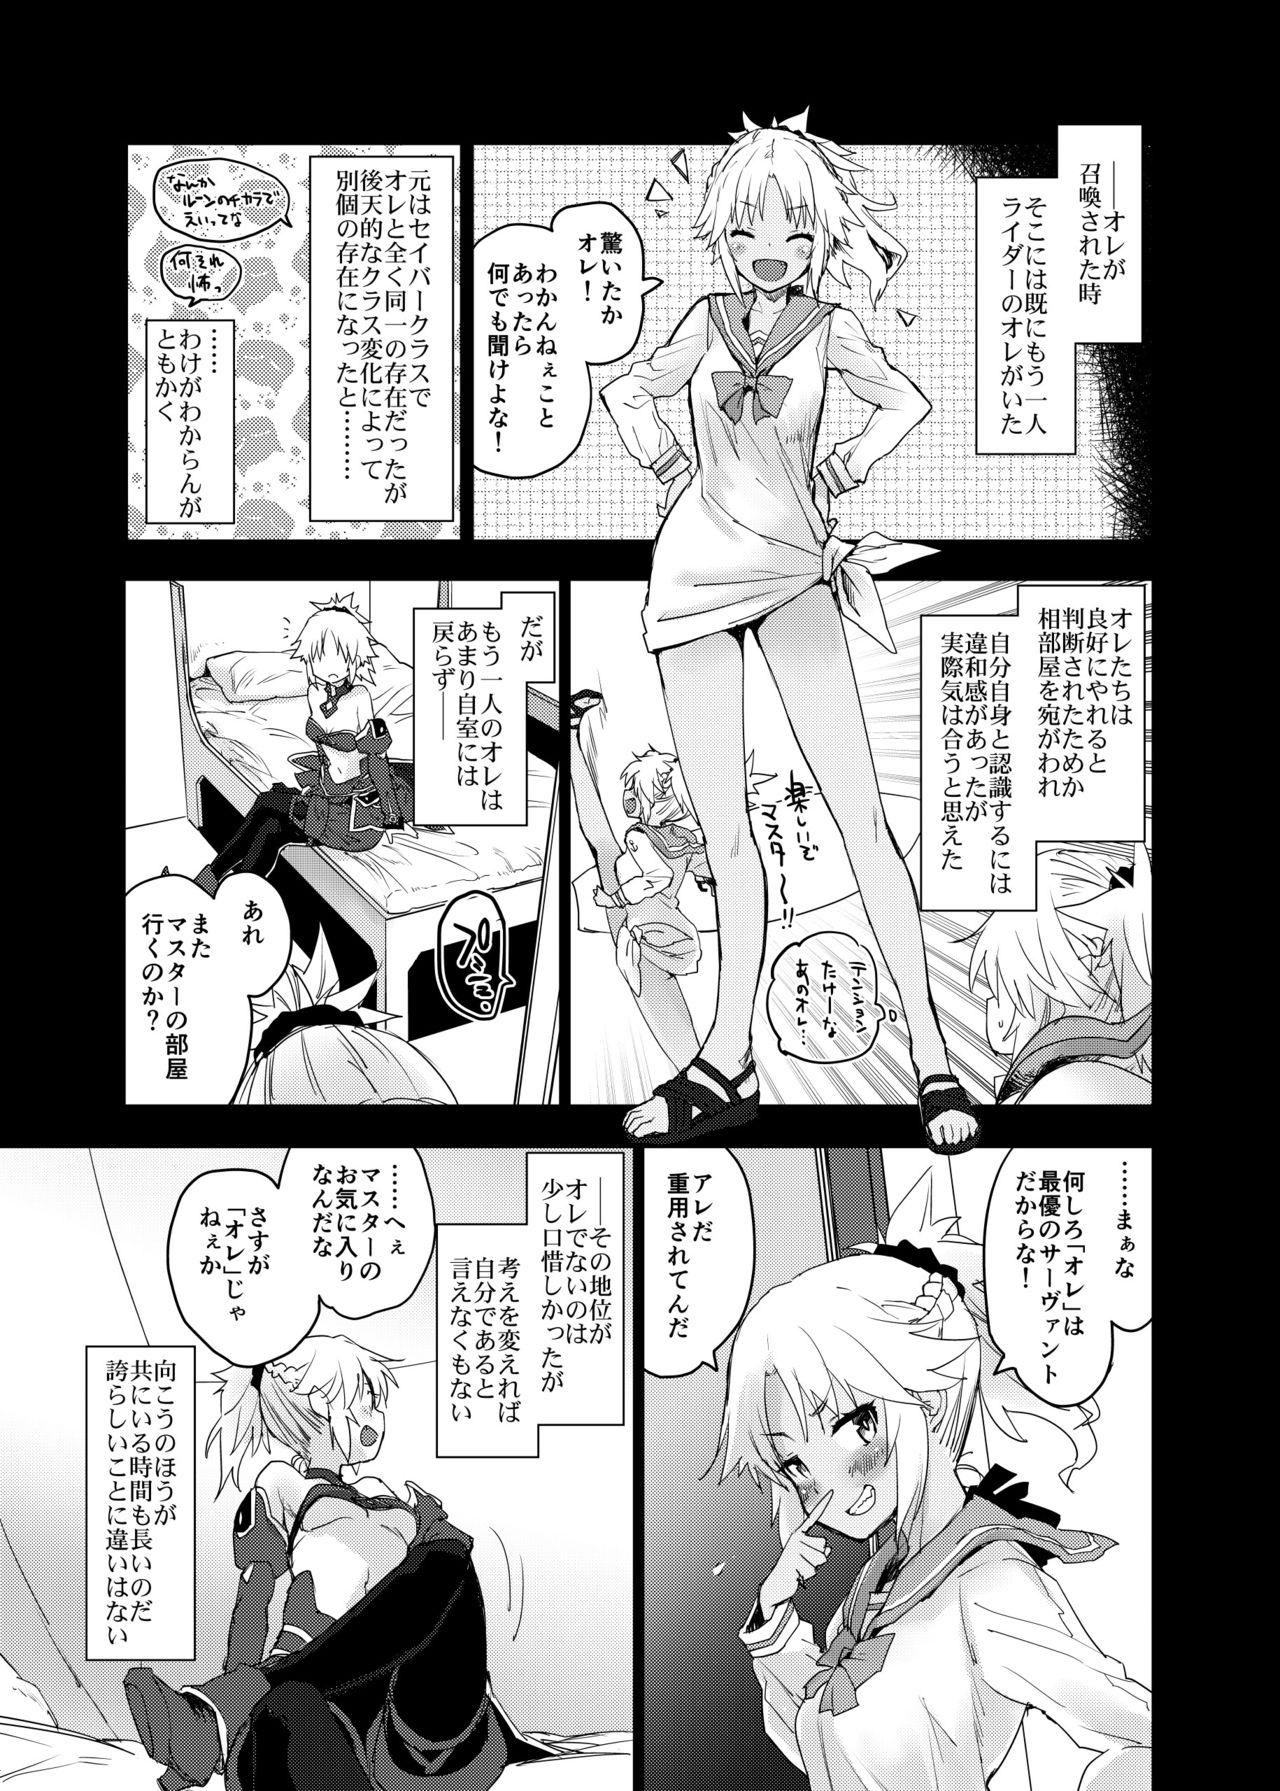 Linda With My Honey Knight - Fate grand order Party - Page 4